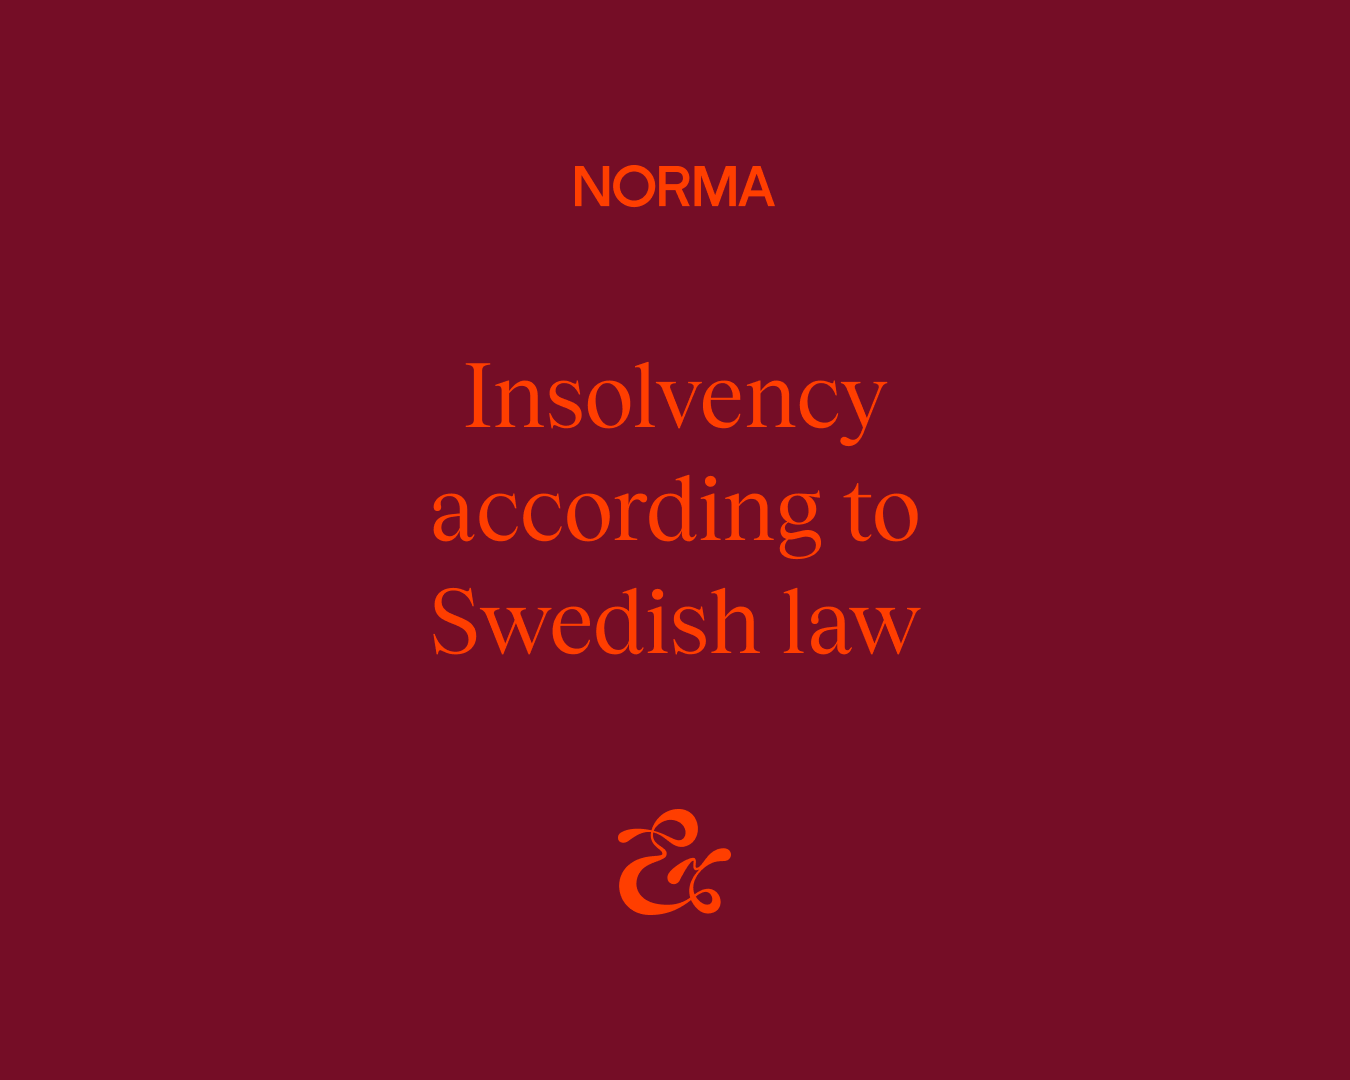 Insolvency according to Swedish law